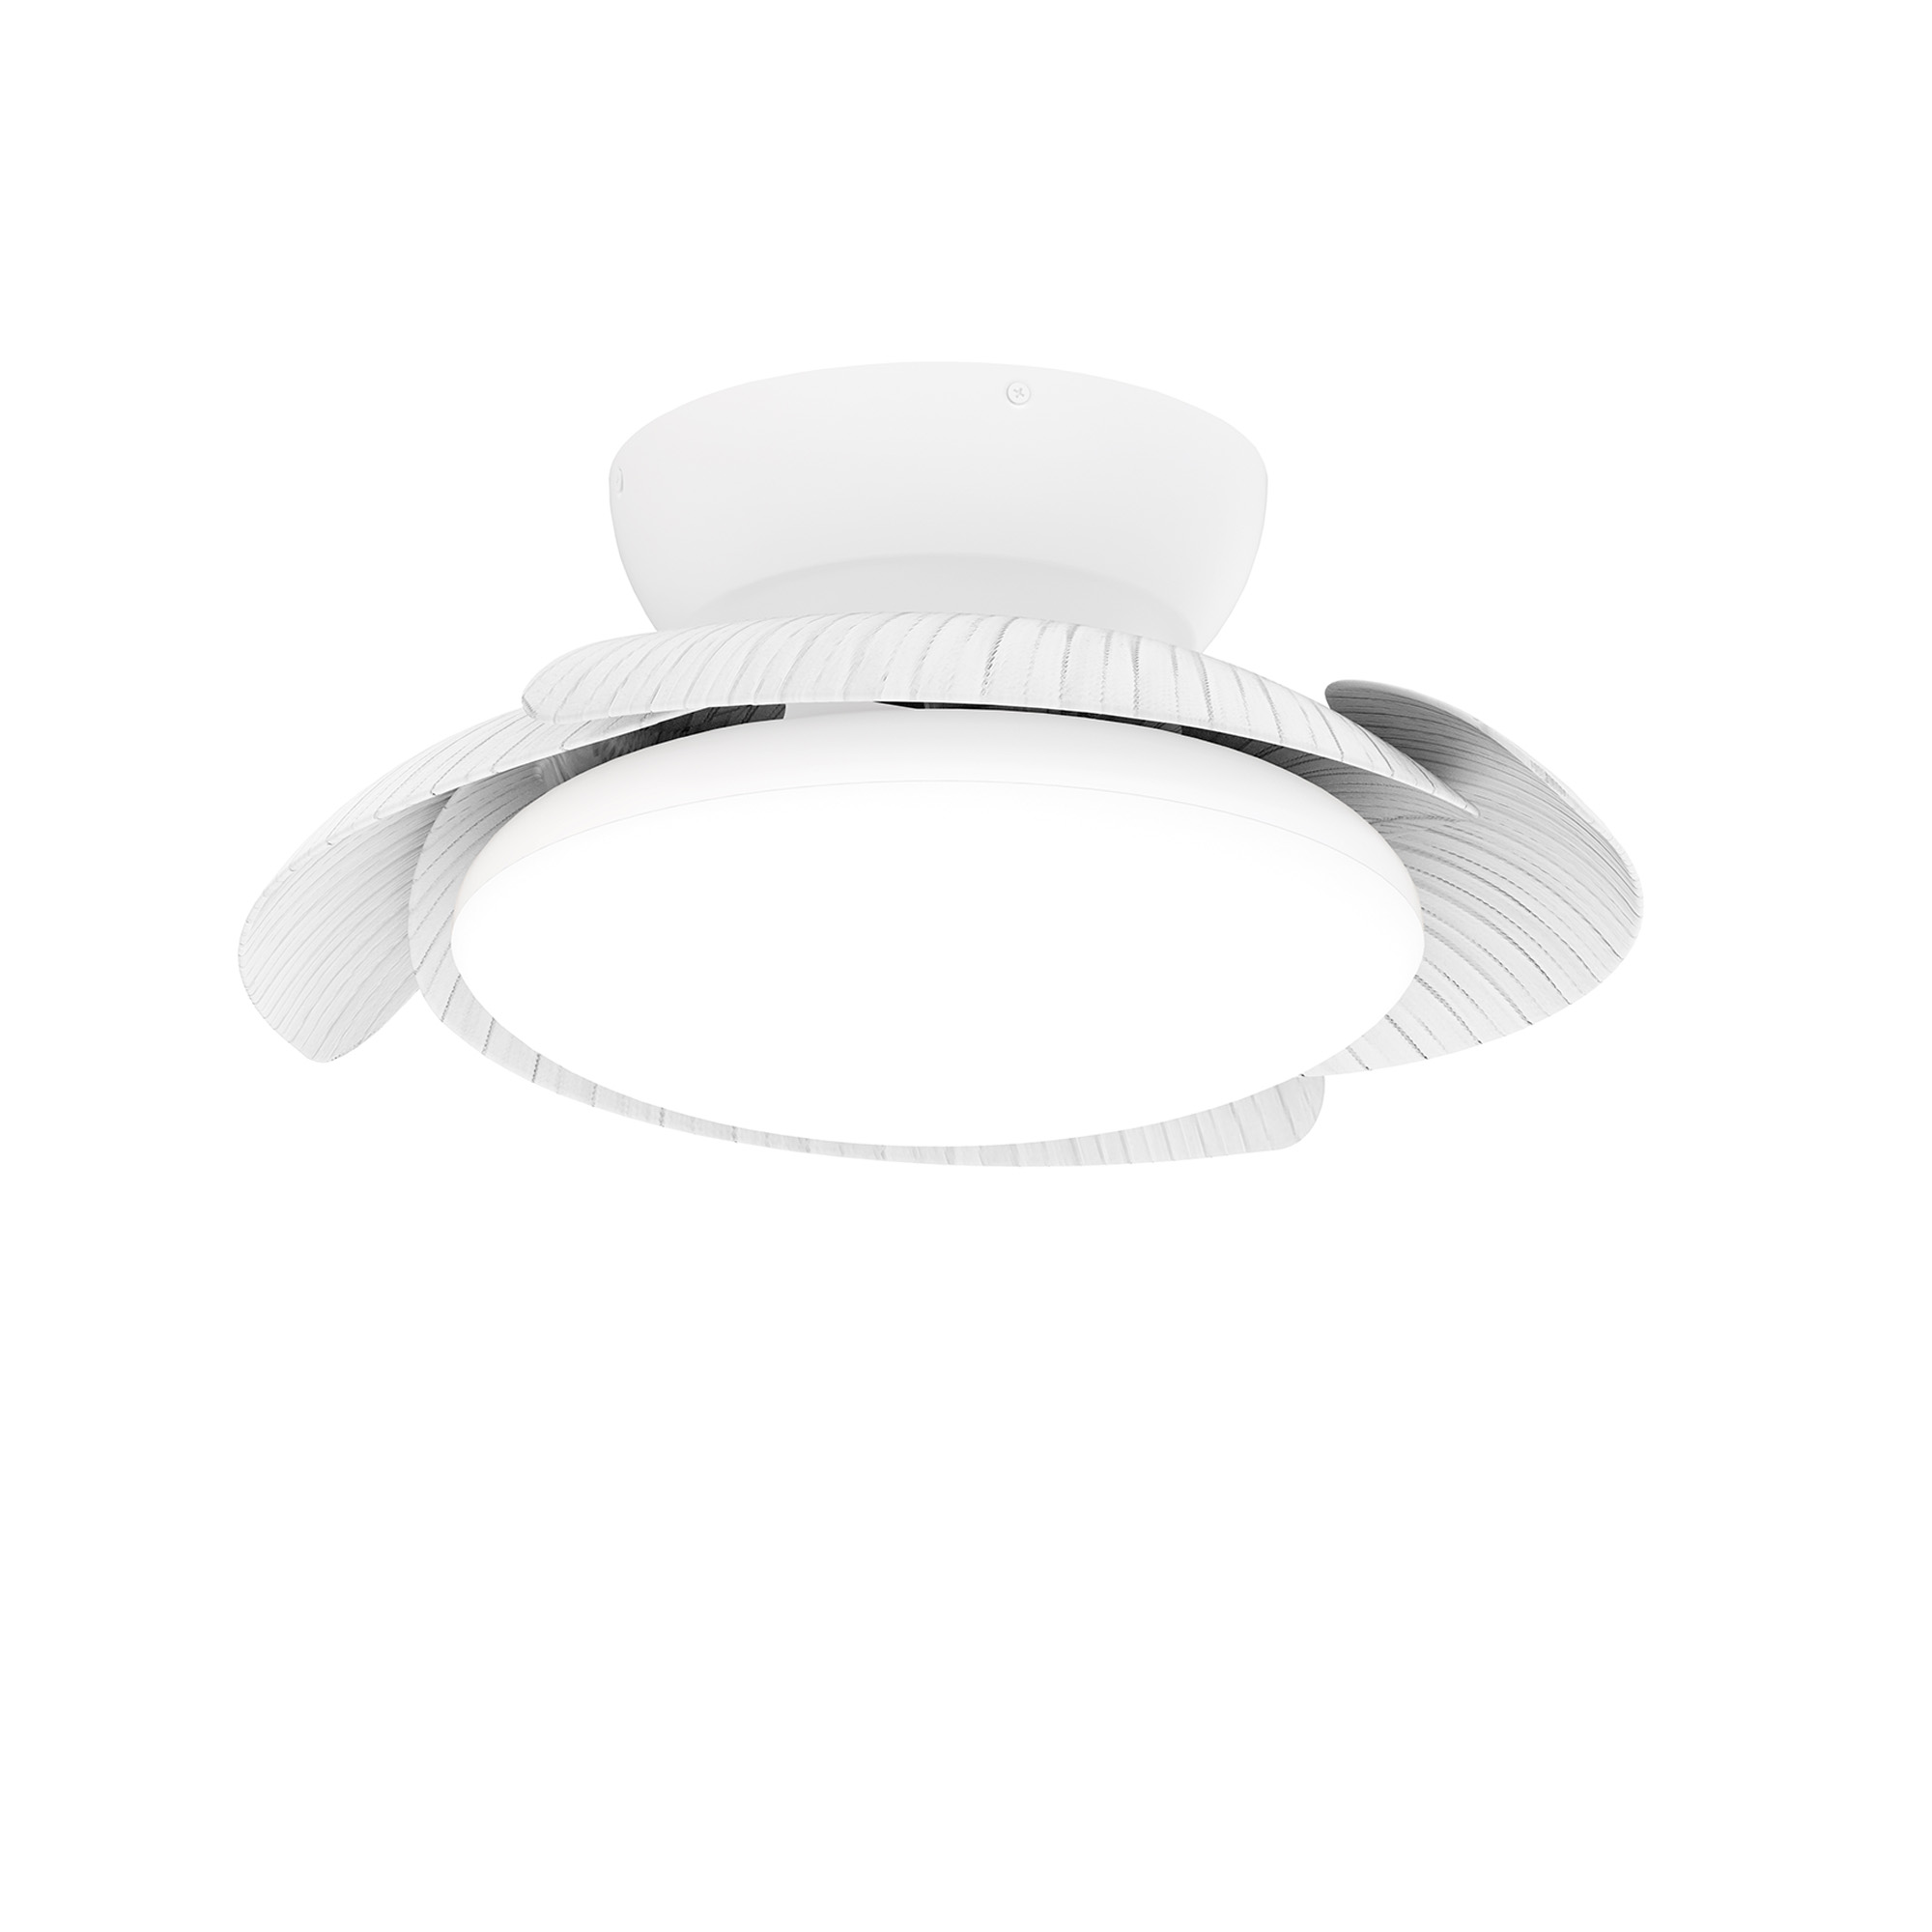 M8233  Aloha 45W LED Dimmable Ceiling Light & Fan, Remote Controlled White